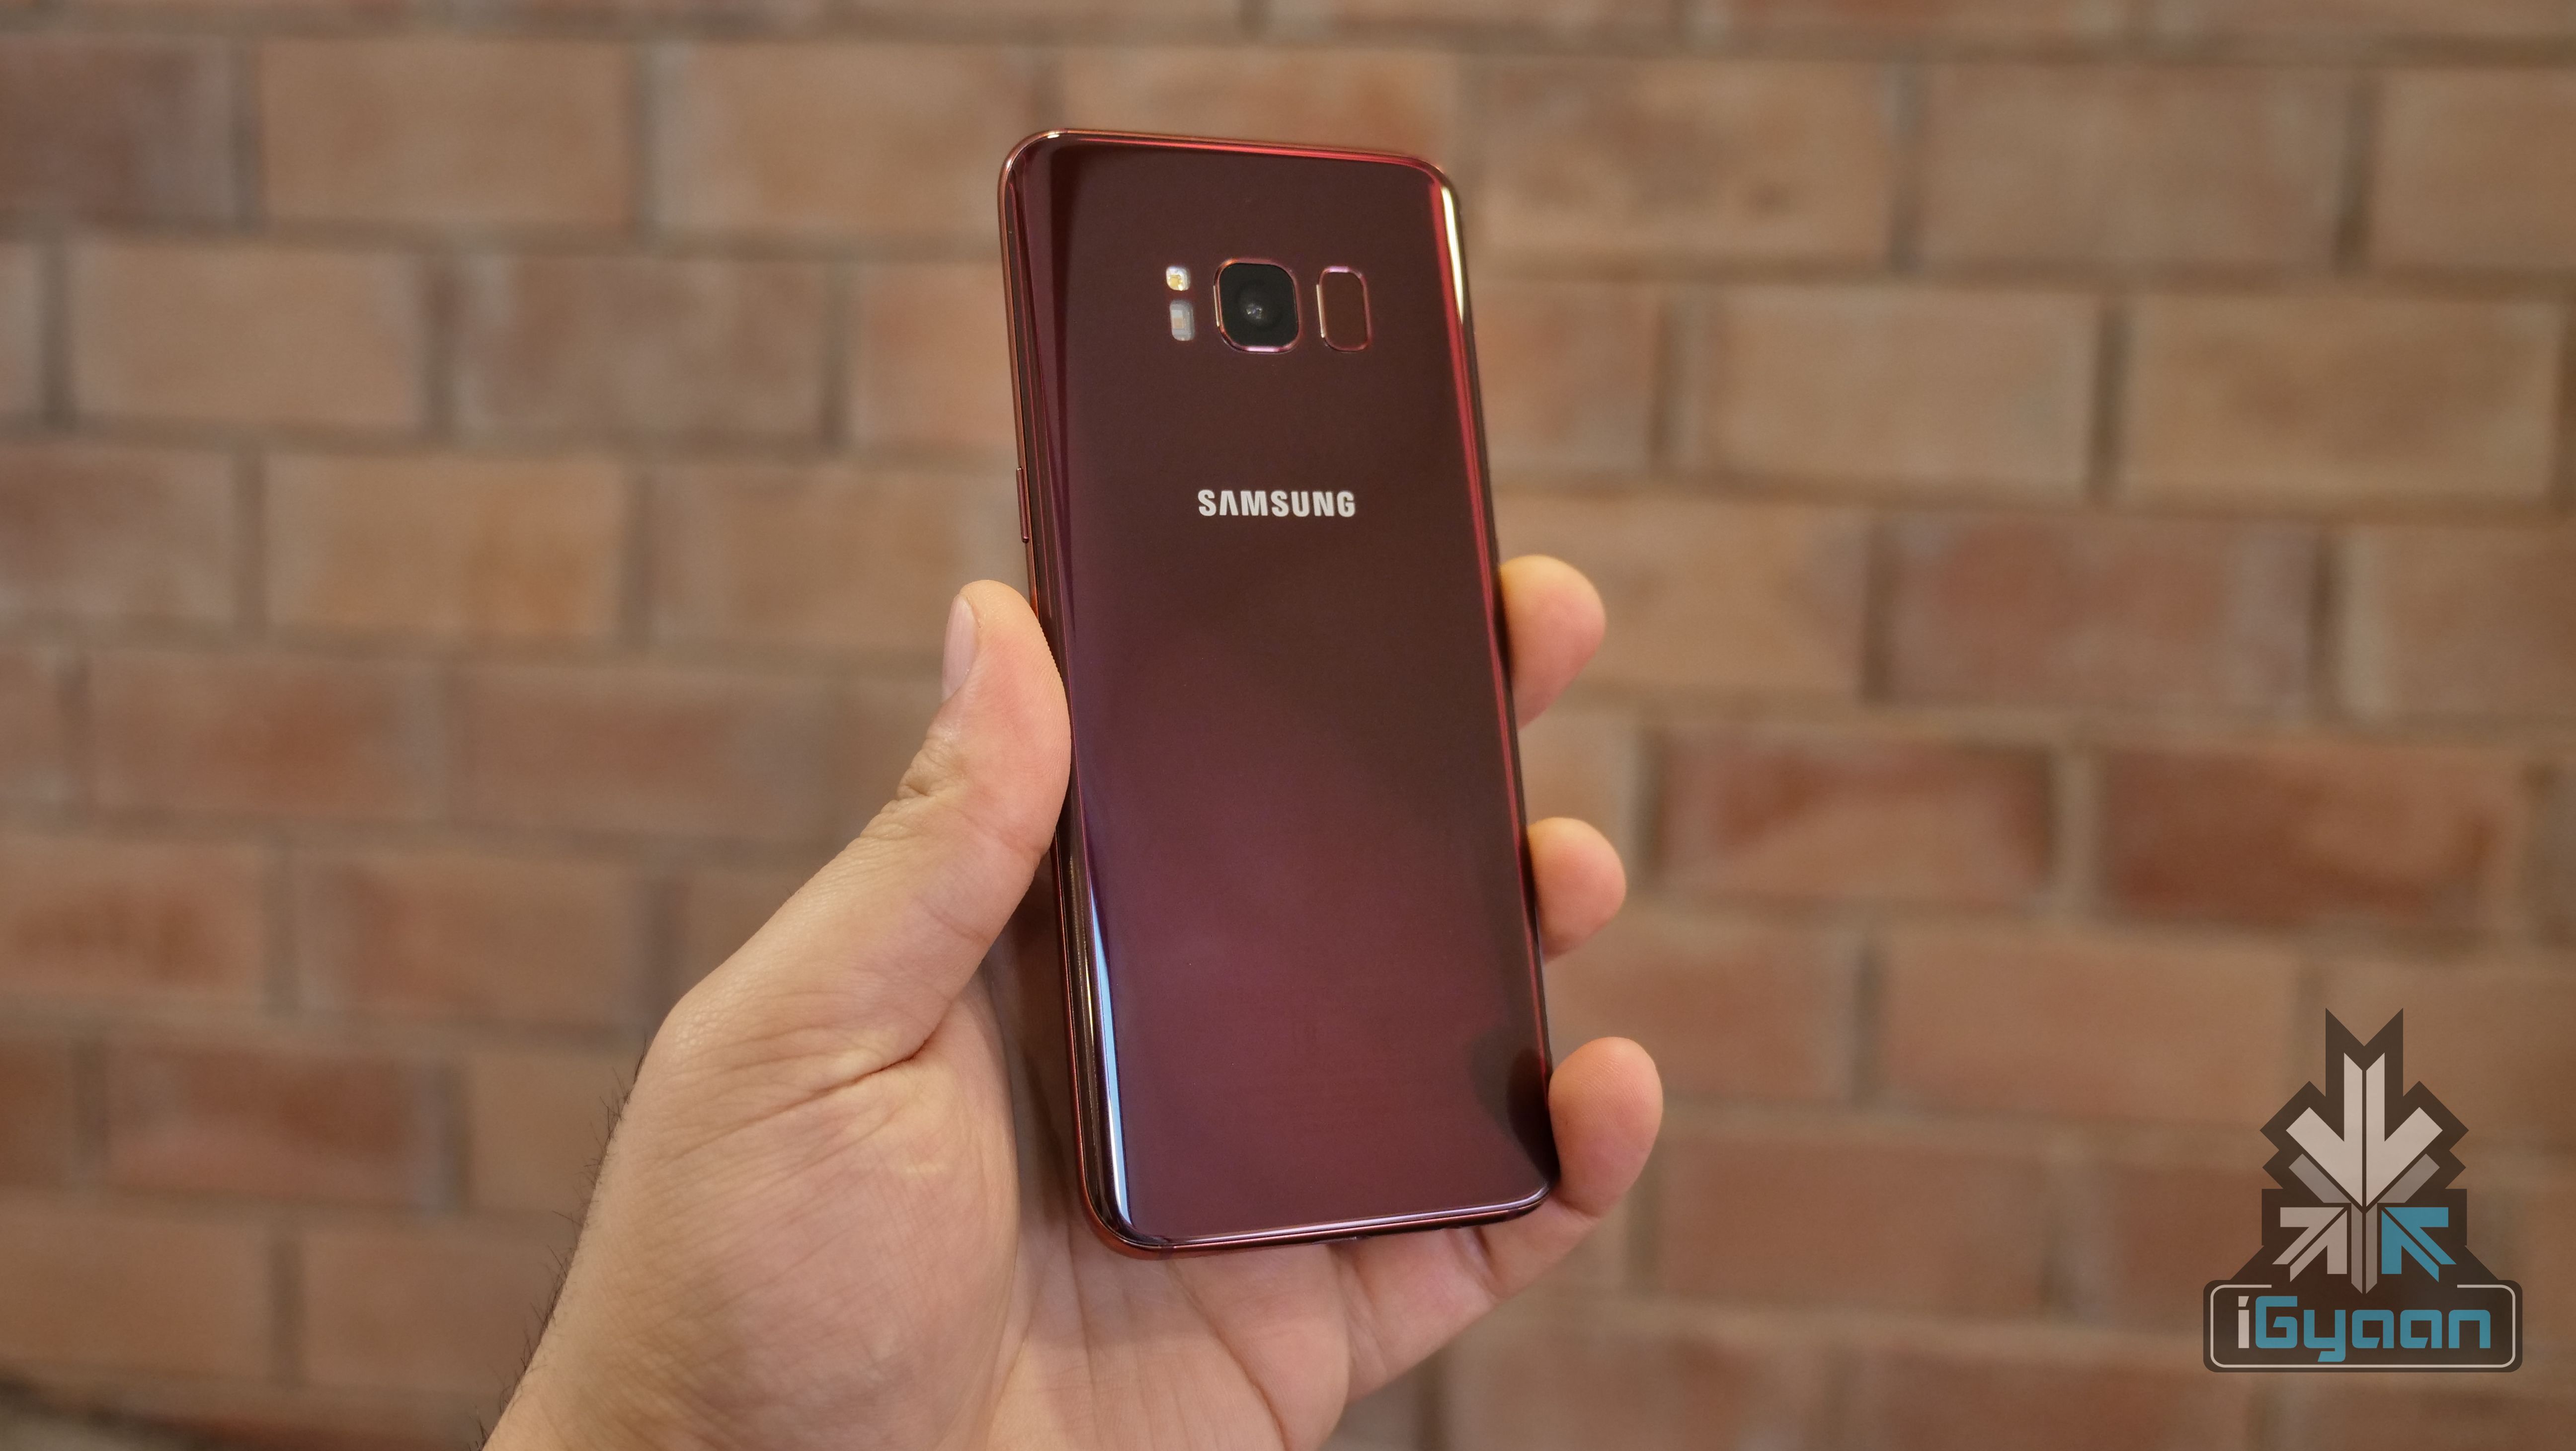 Samsung Galaxy S8 Burgundy Red Launched In India | iGyaan Network